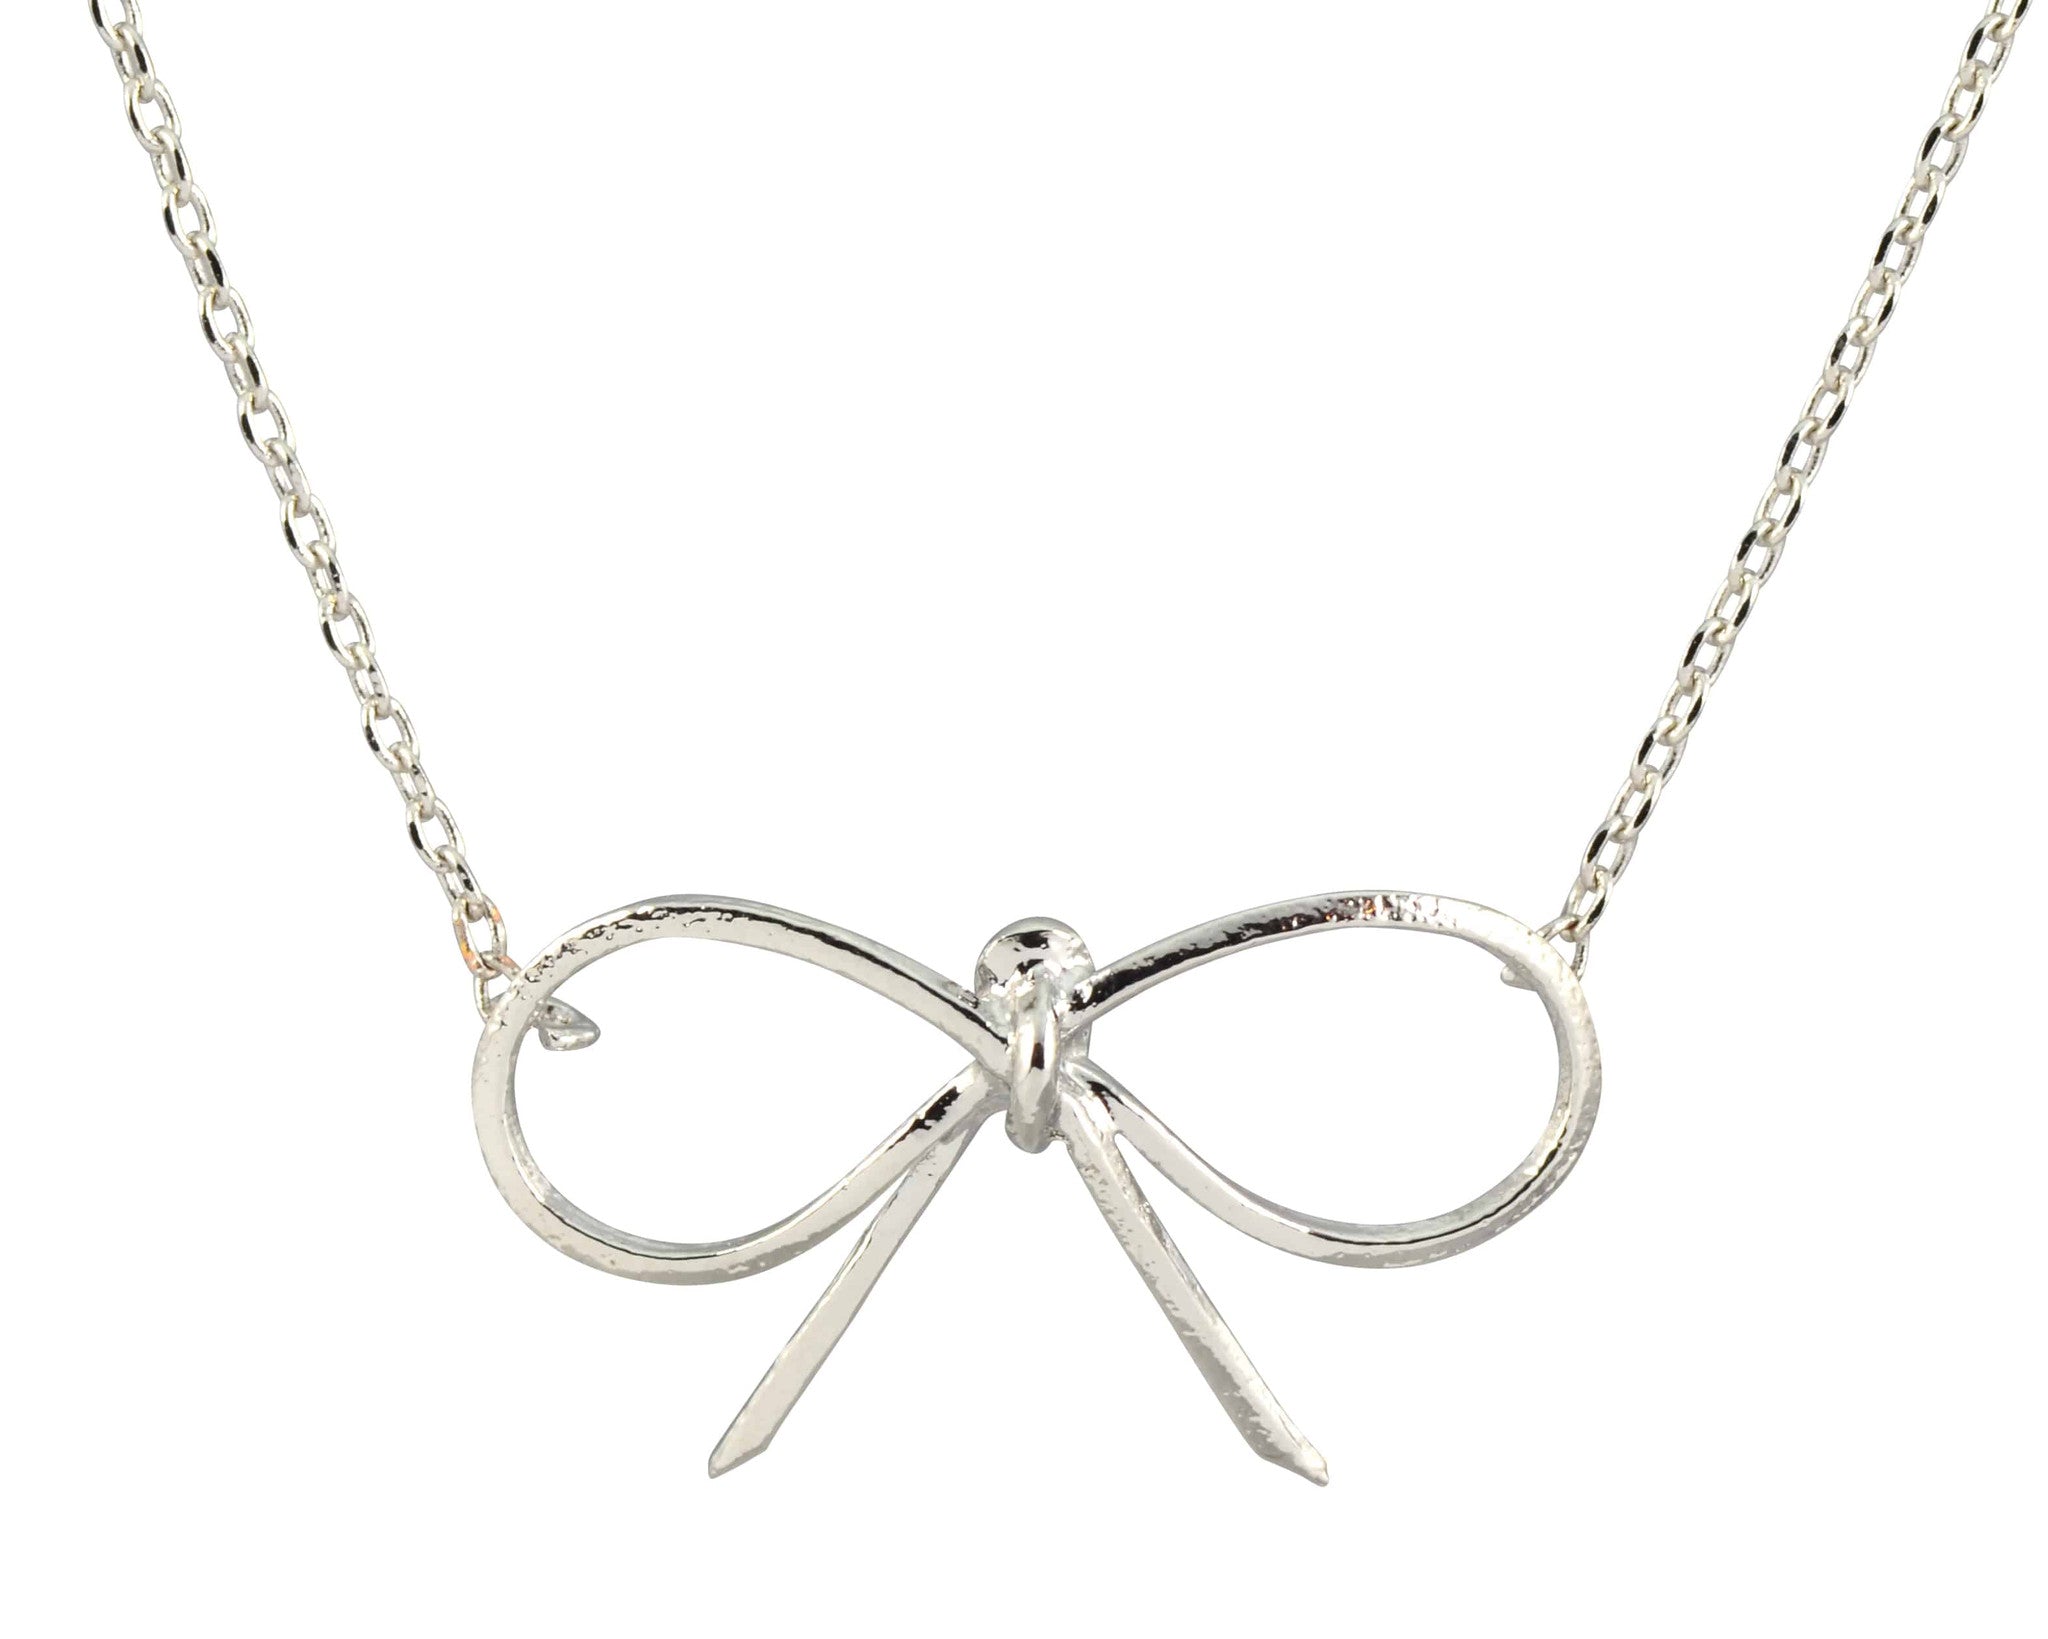 Enreverie Bow/Knot Necklace, Silver Plated Pendant